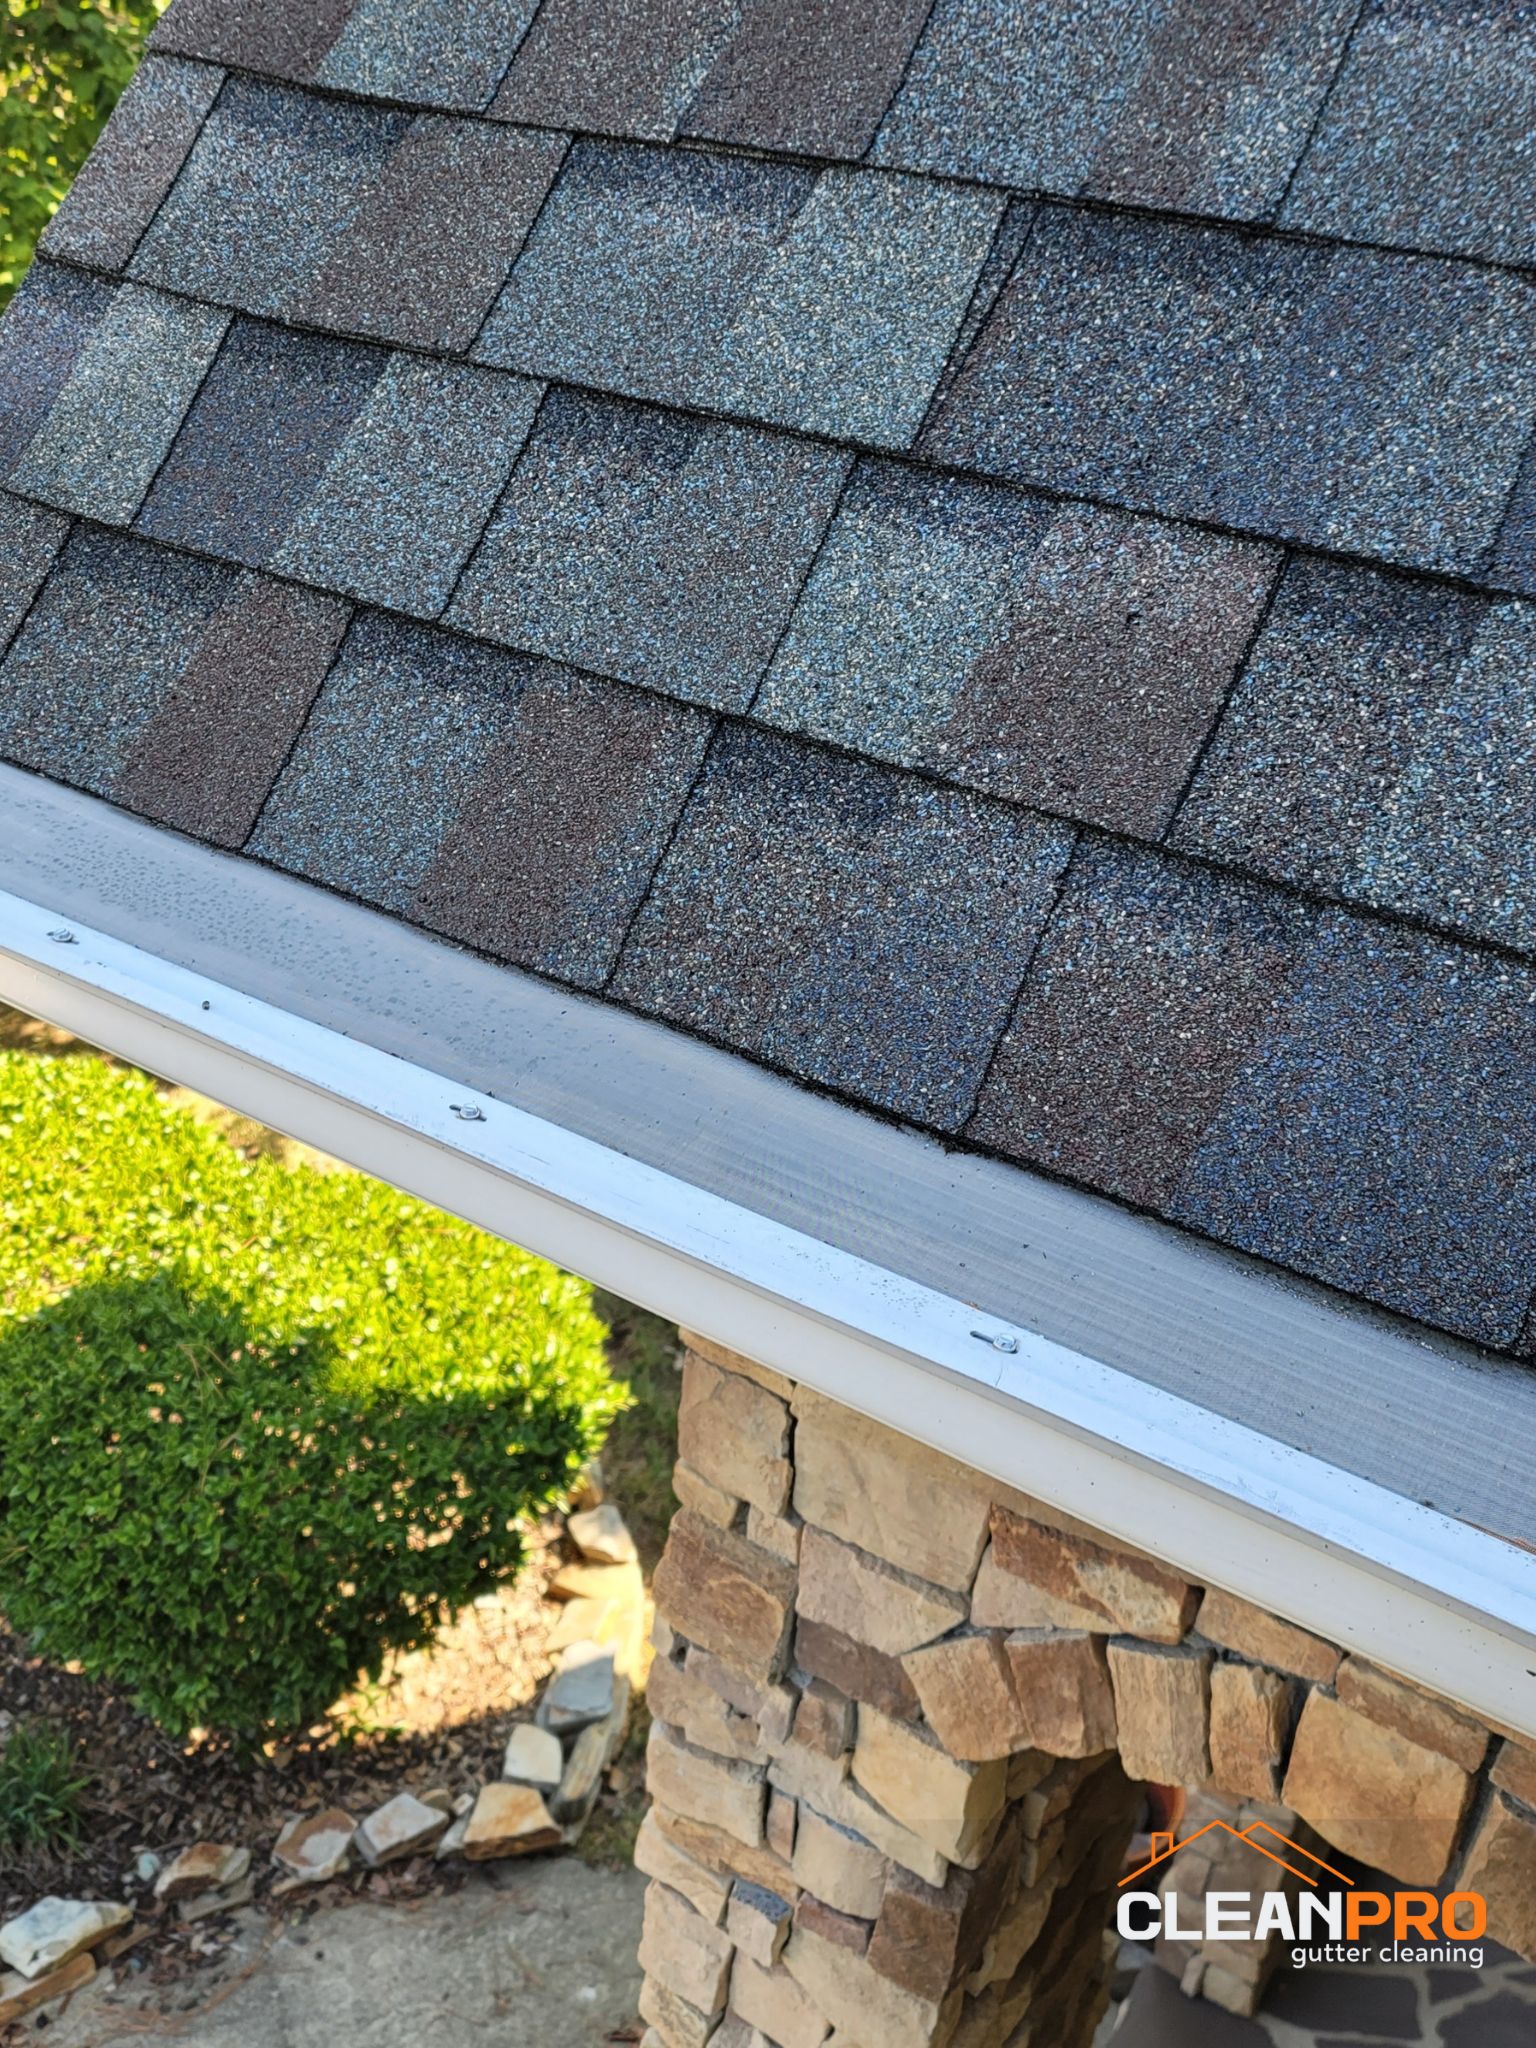 Top Notch Gutter Cleaning Service in Omaha